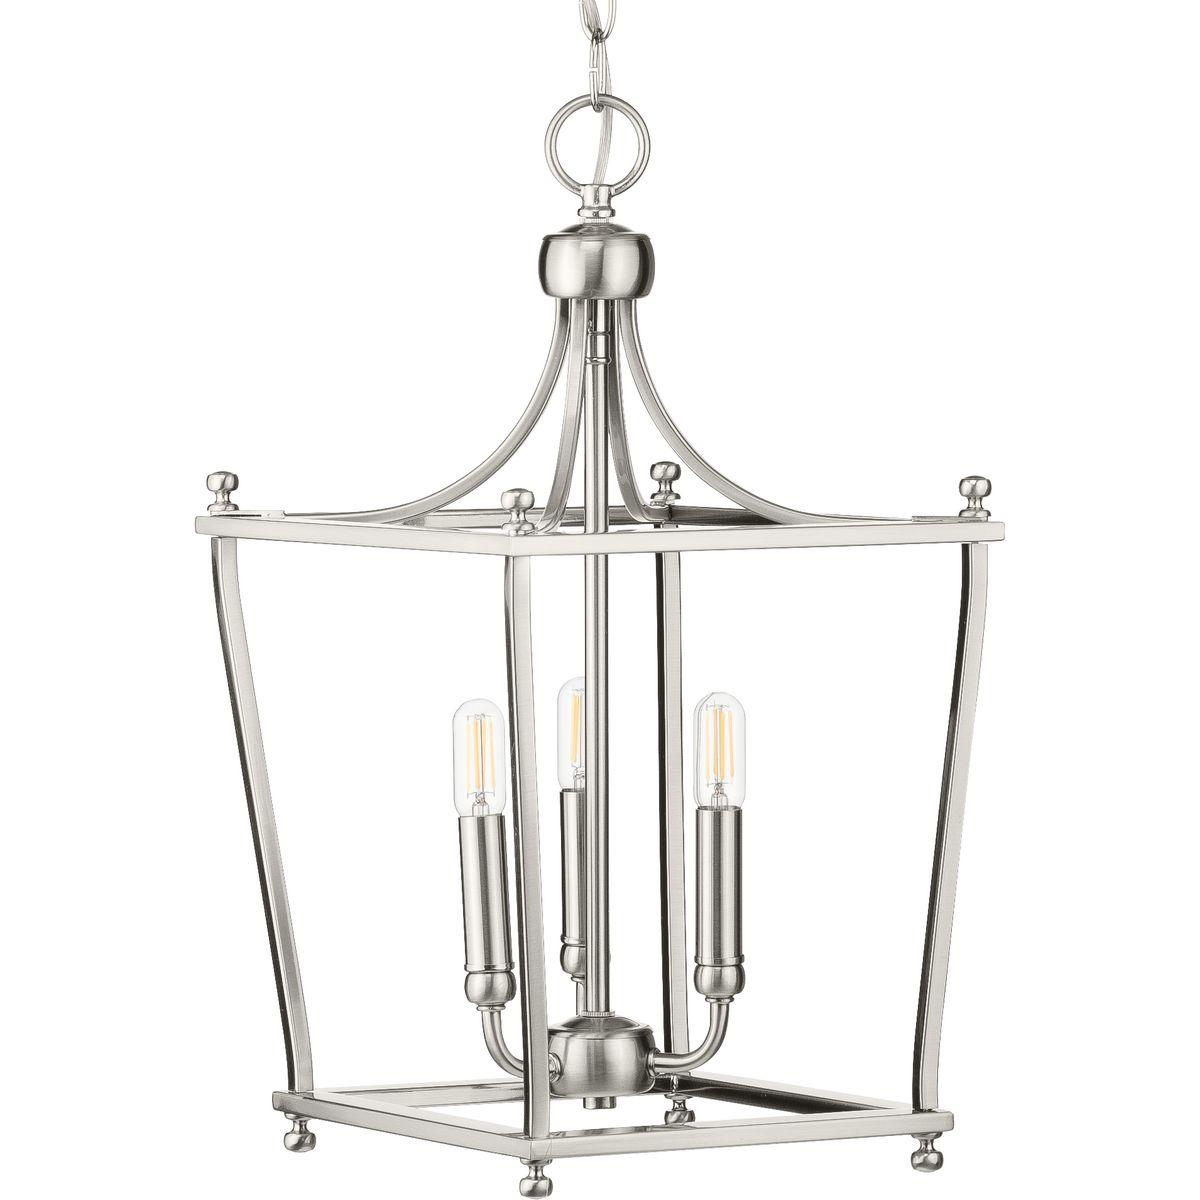 Hubbell P500213-009 Offer a modern spin on a timeless design with the Parkhurst Collection. Lantern-style metal frames create an airy structure ideal for emitting ambient light over memories being made below. Inside the frame perch smooth, simple light bases ready to offer y